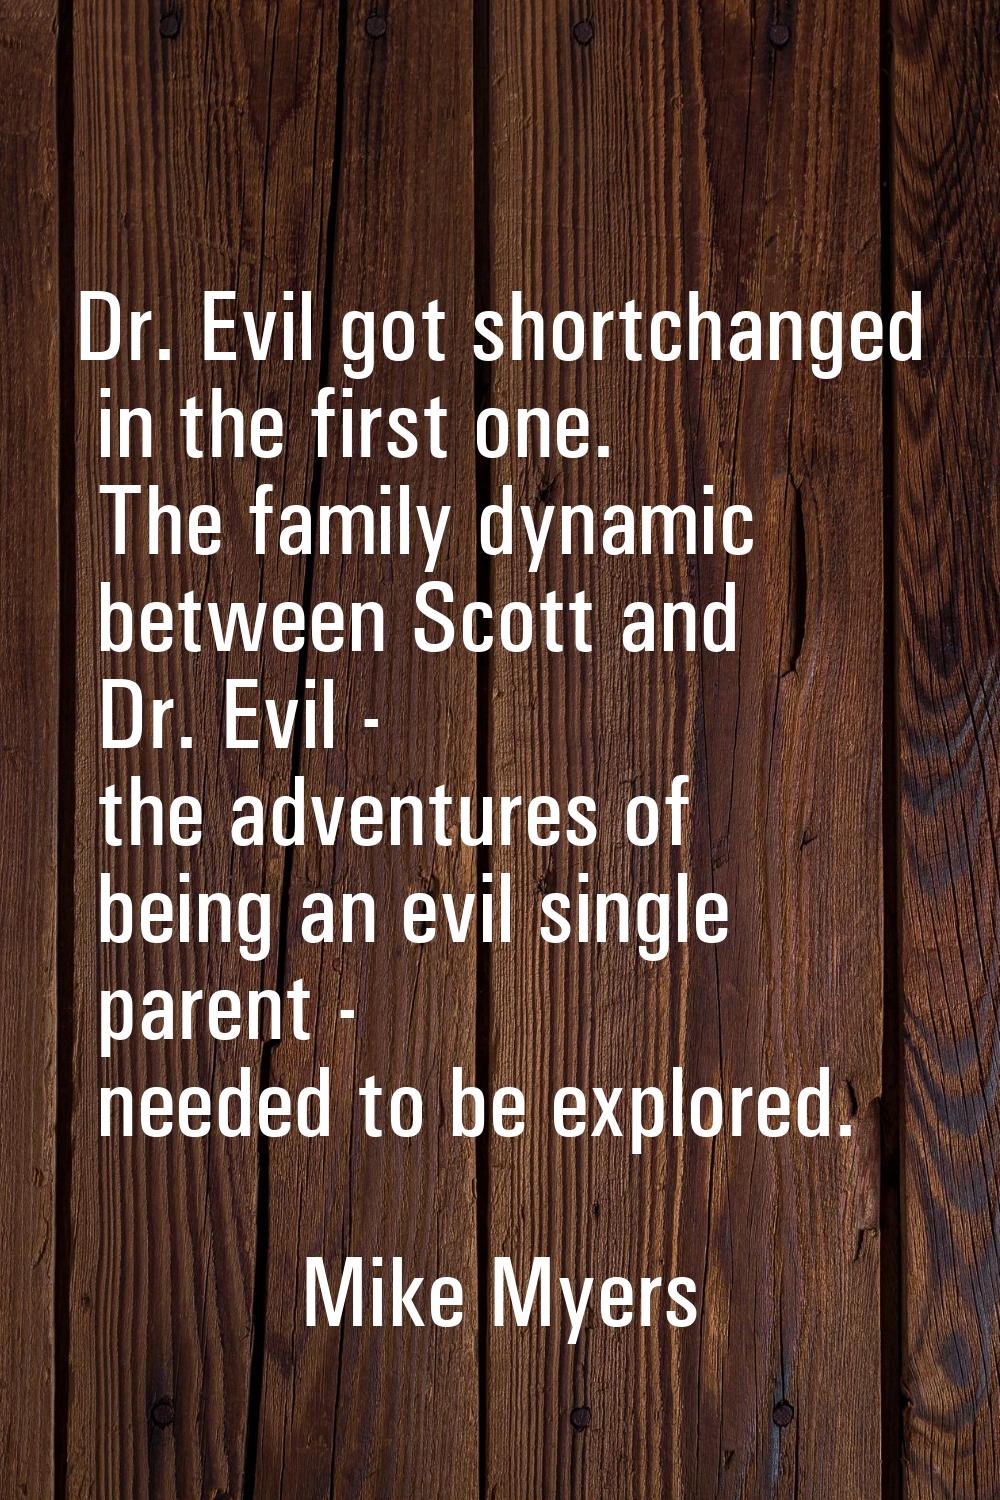 Dr. Evil got shortchanged in the first one. The family dynamic between Scott and Dr. Evil - the adv